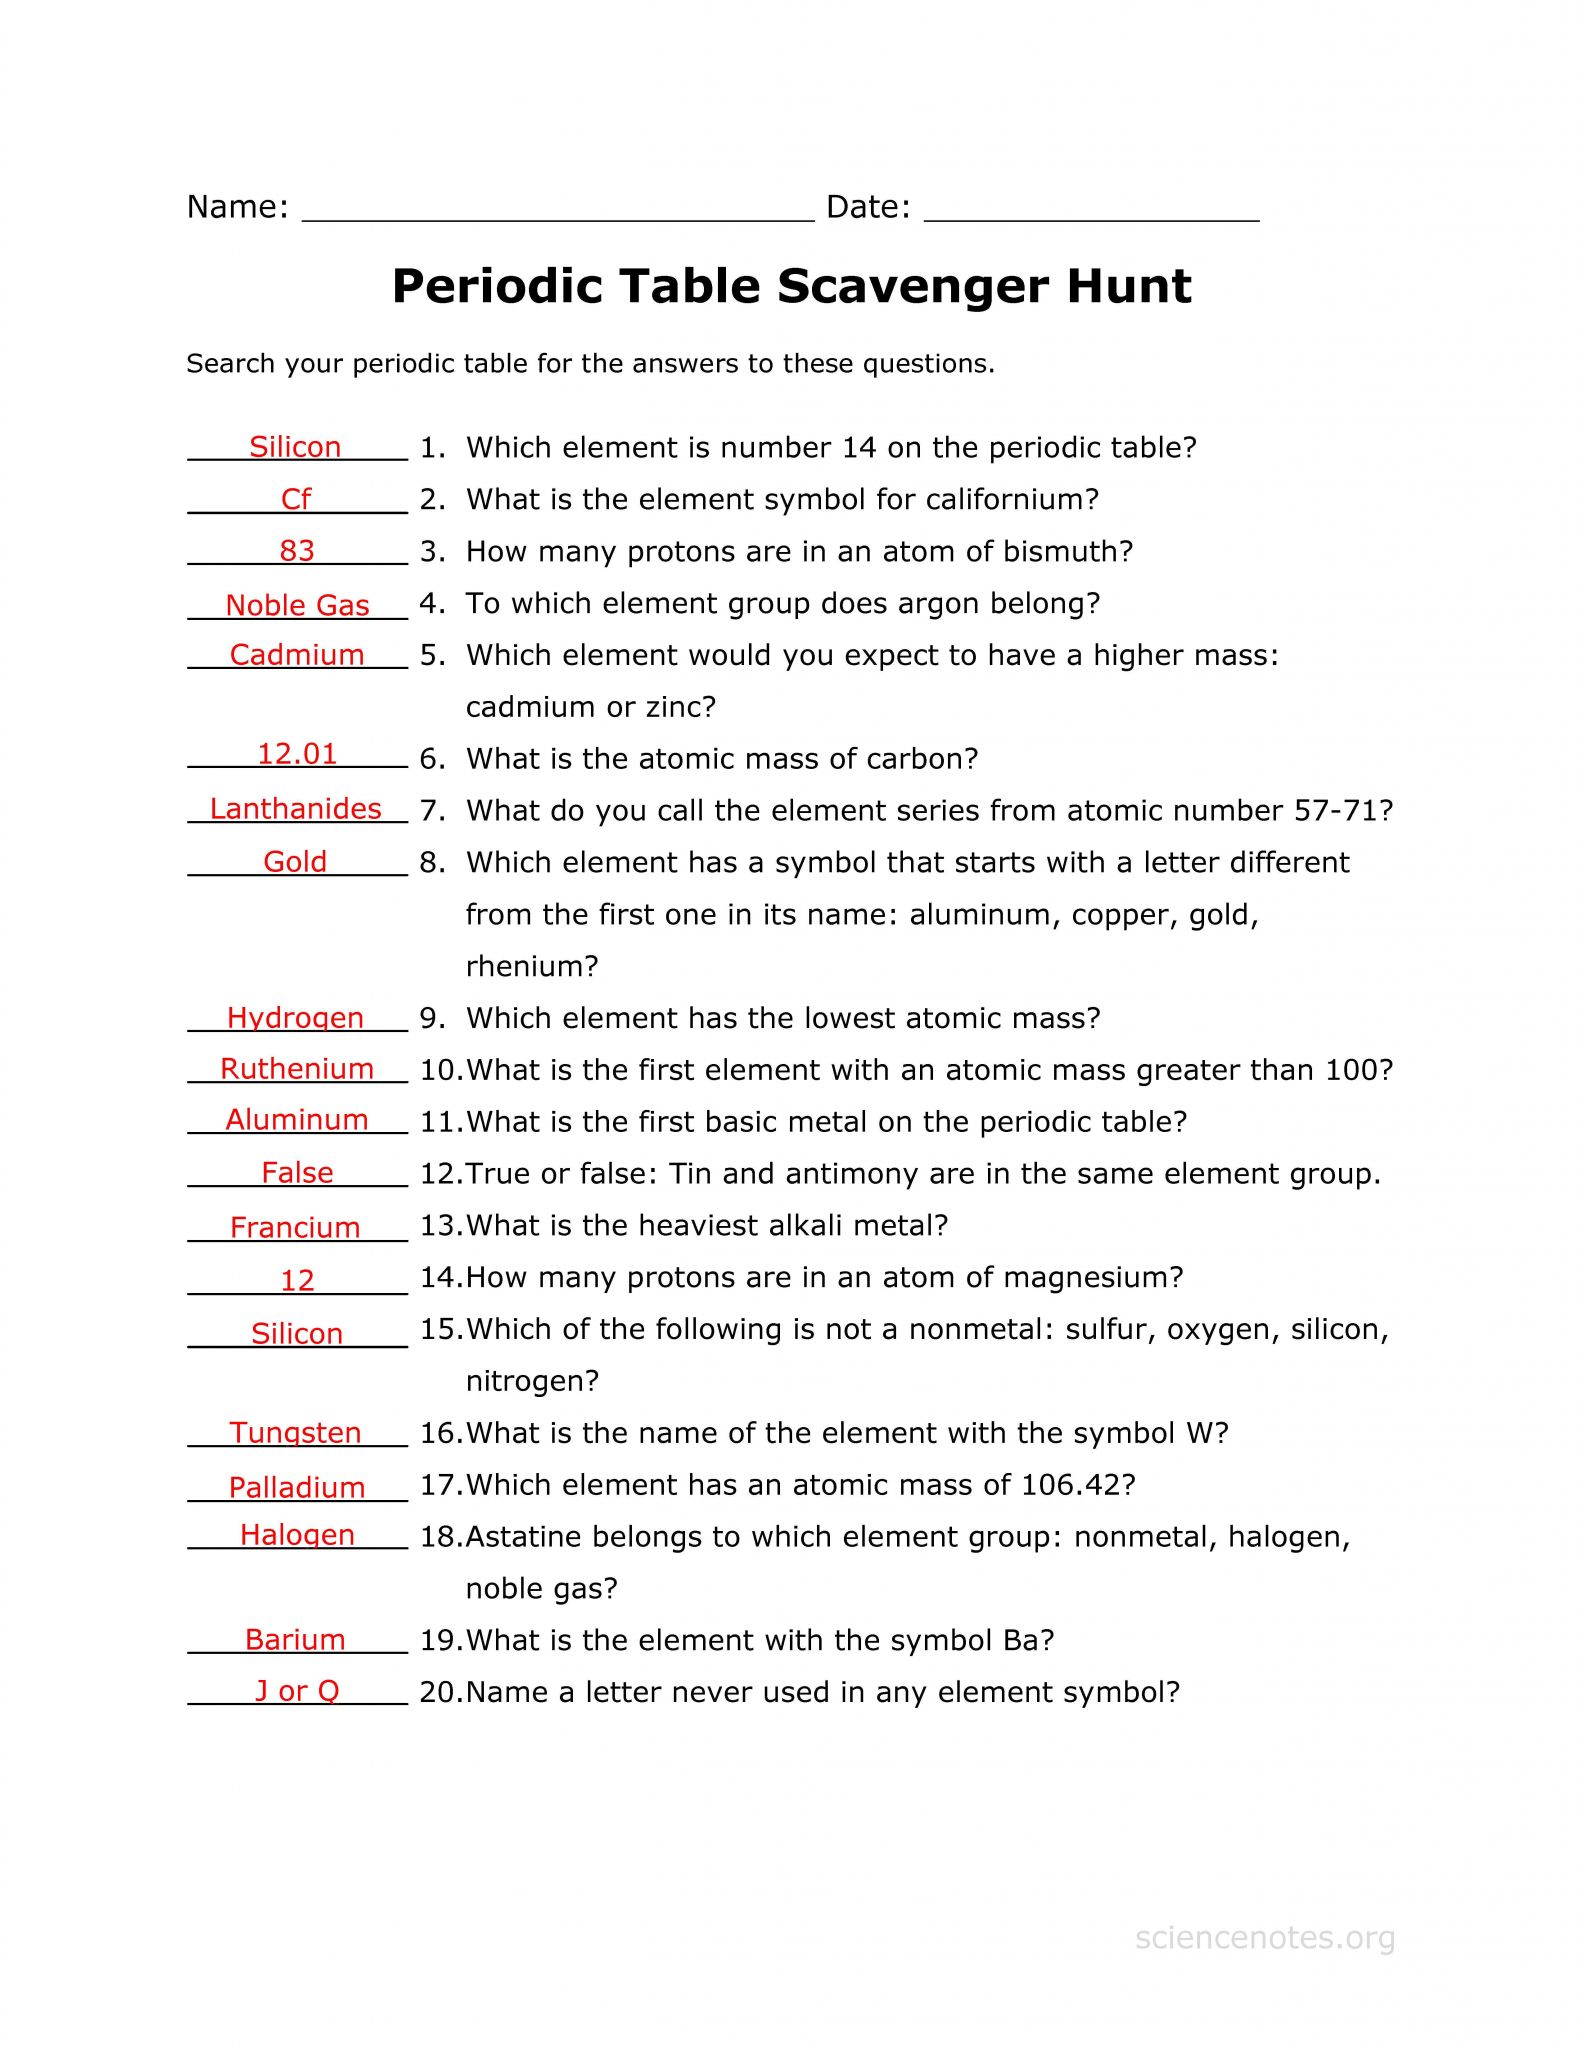 Lab Safety Symbols Worksheet Answer Key as Well as Answer Key to the Periodic Table Scavenger Hunt Worksheet Related